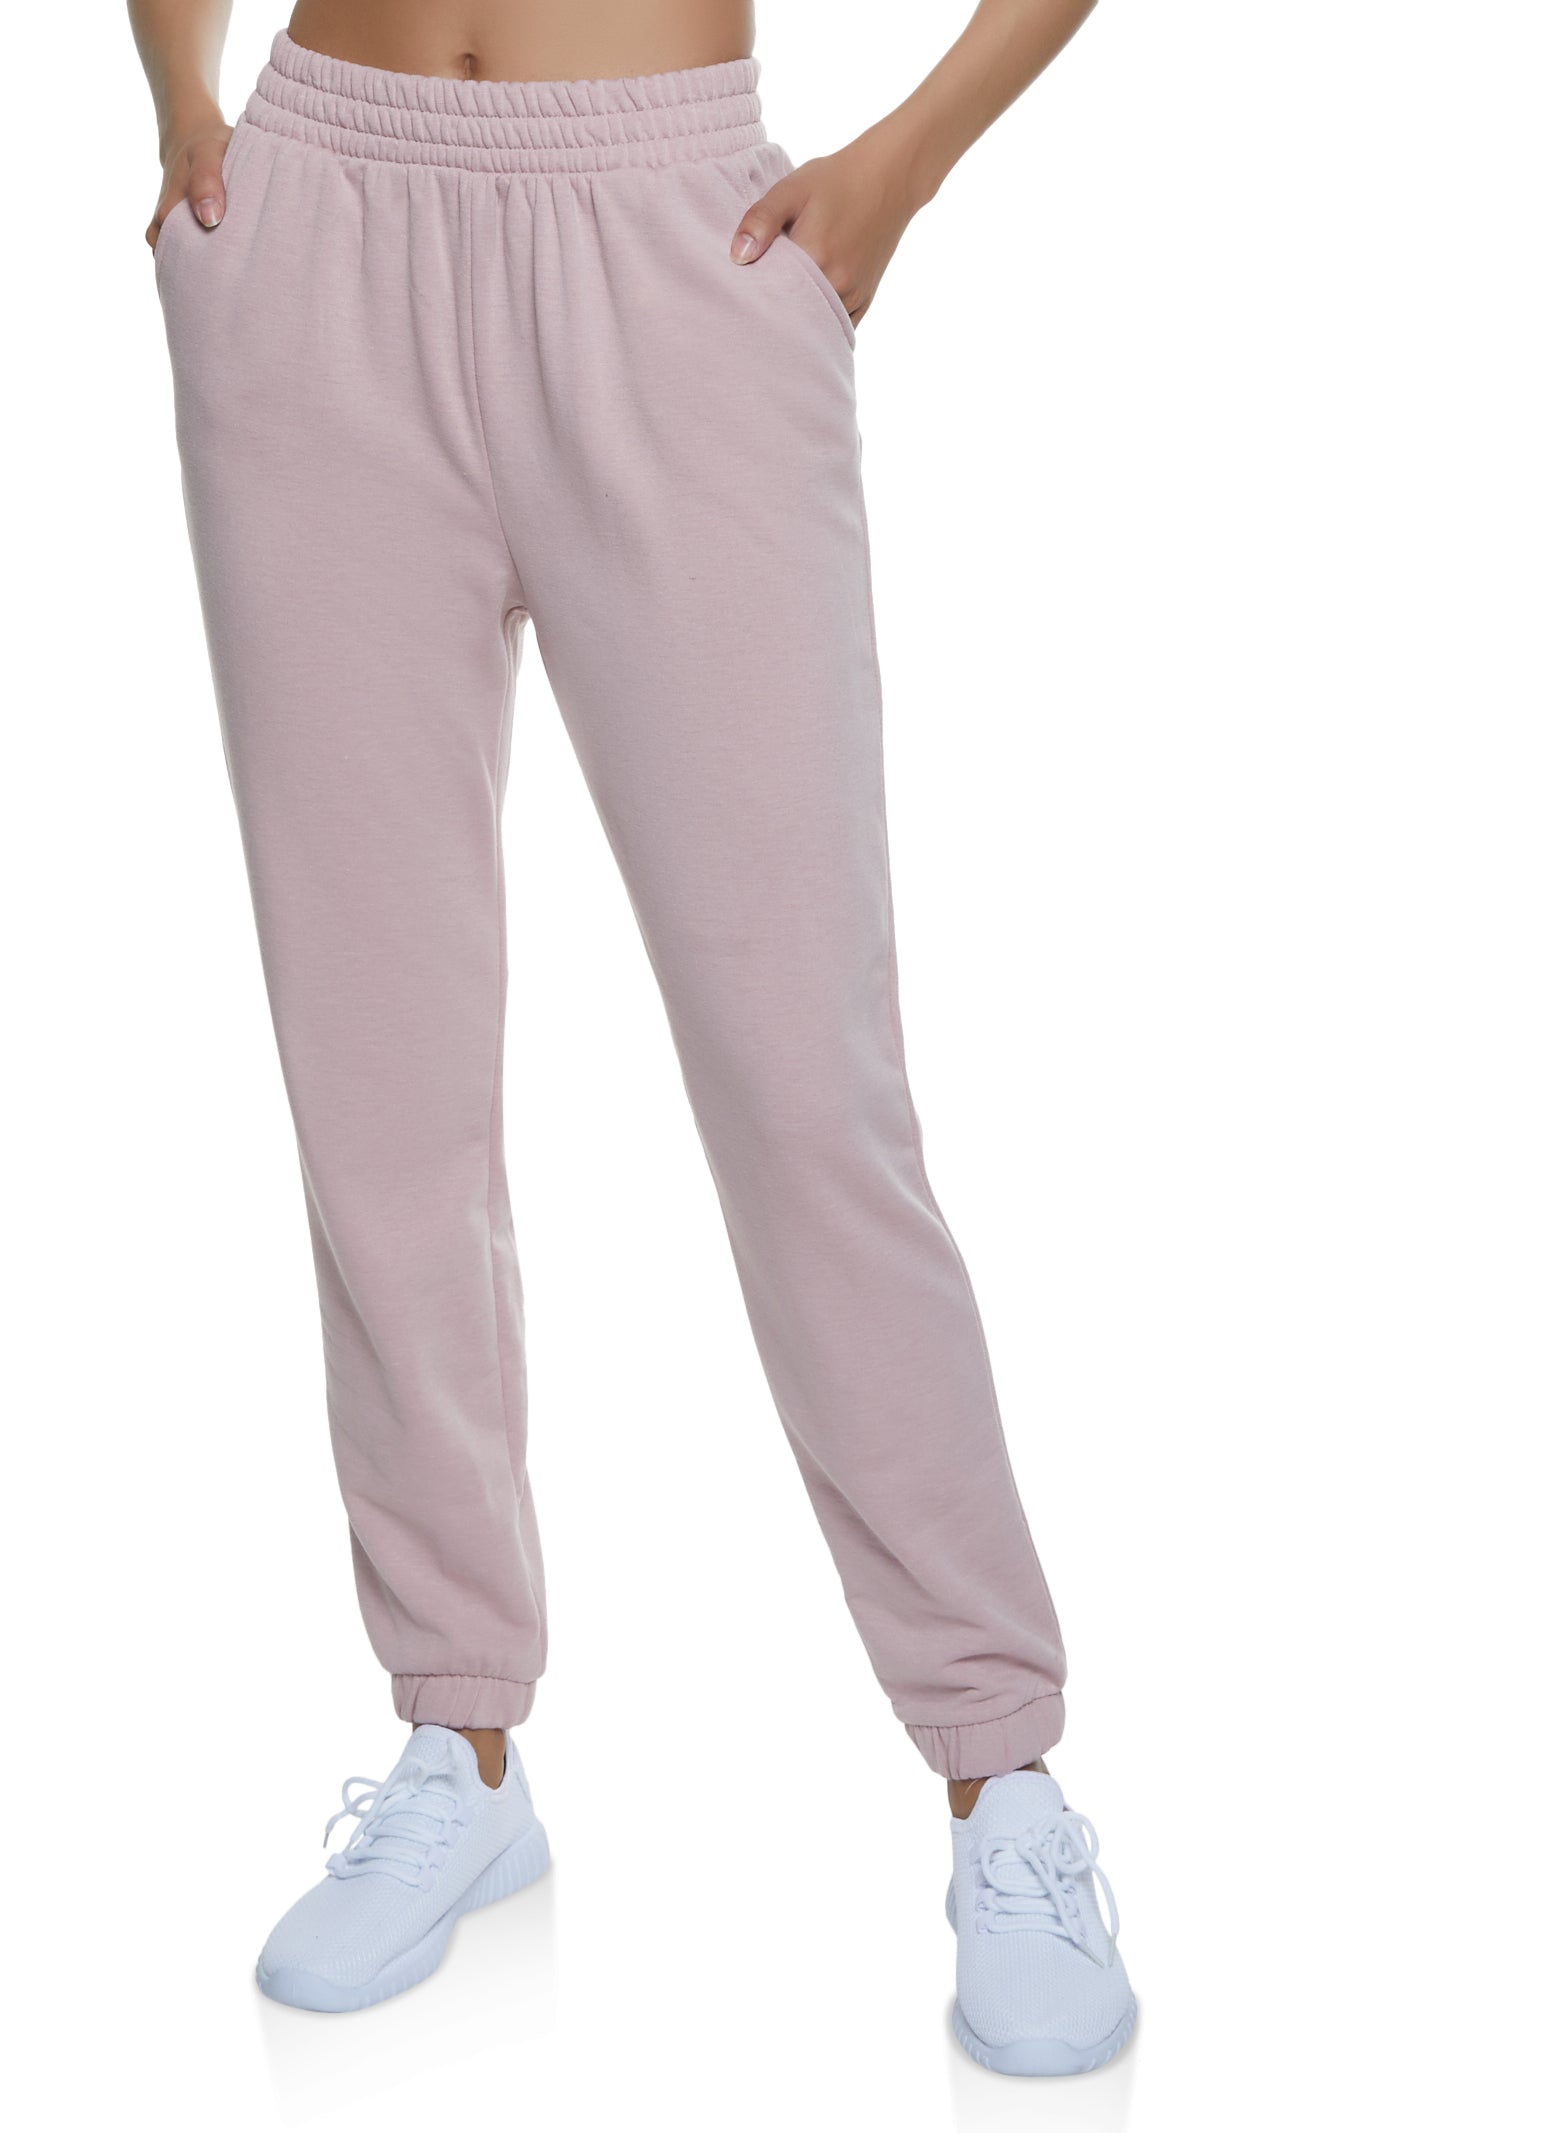  ATHMILE Cargo Pants Women Sweatpants Joggers with